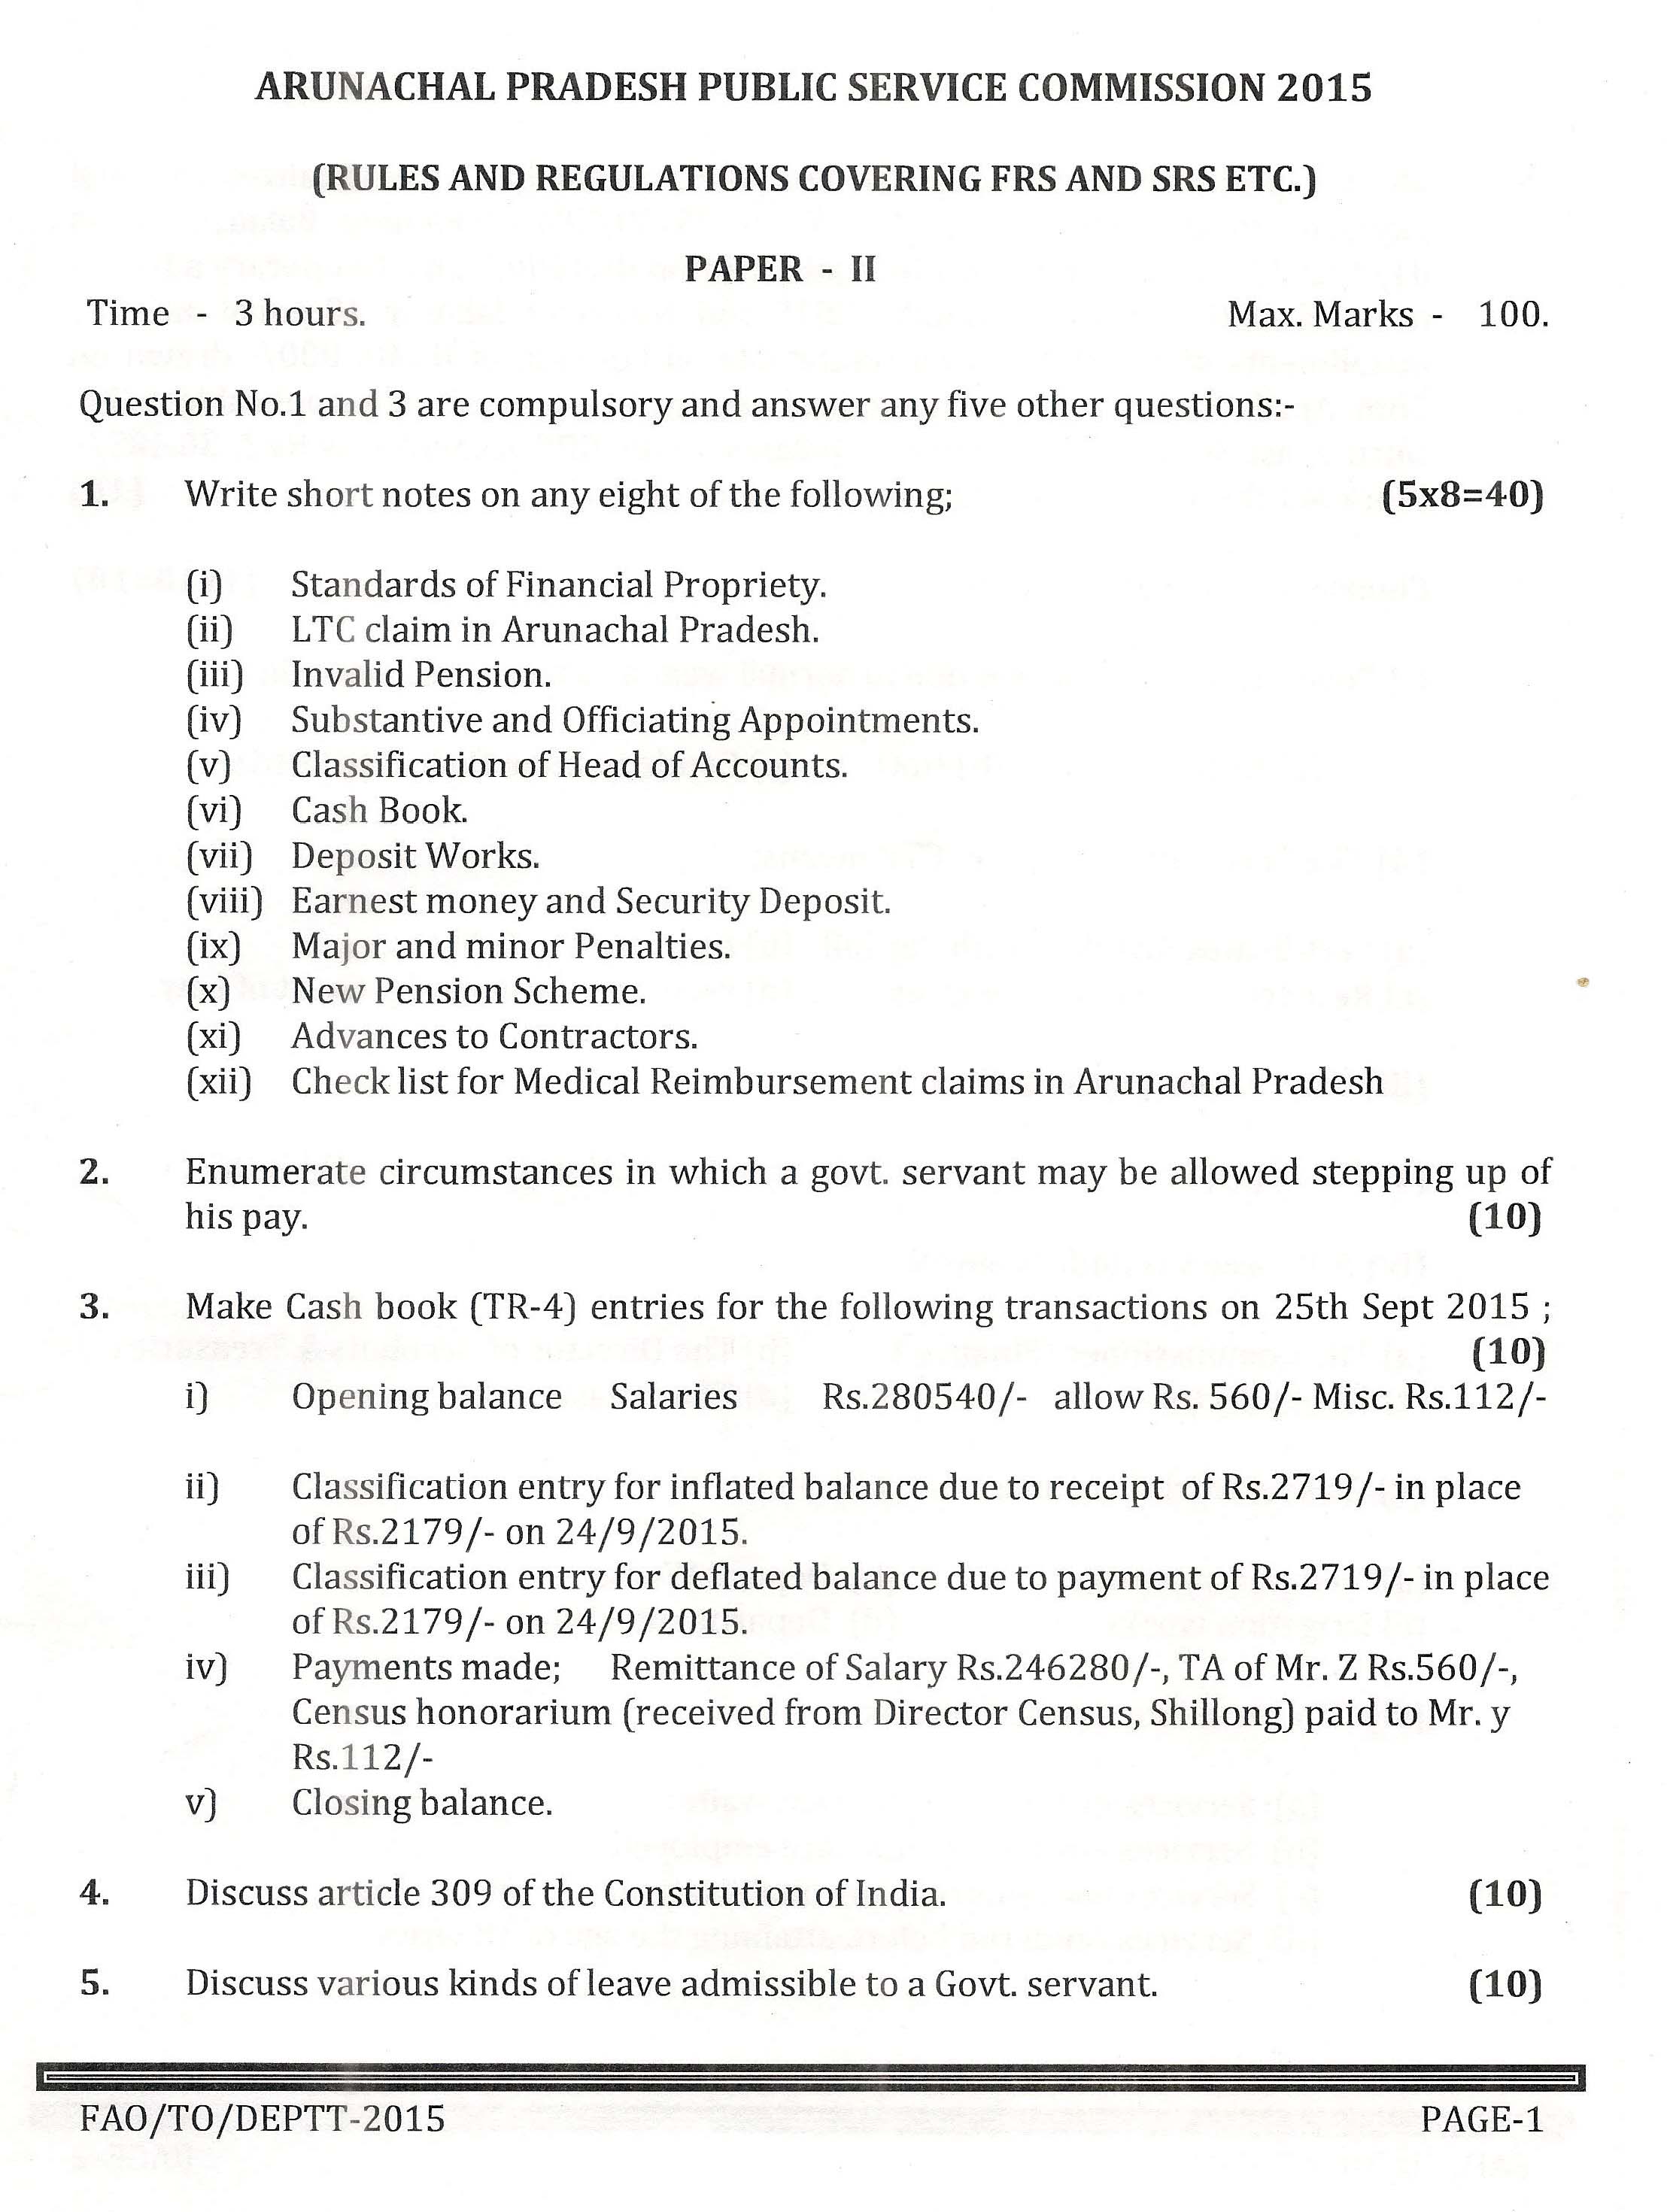 APPSC FAO TO Department Exam 2015 Rules and Regulations Paper II 1